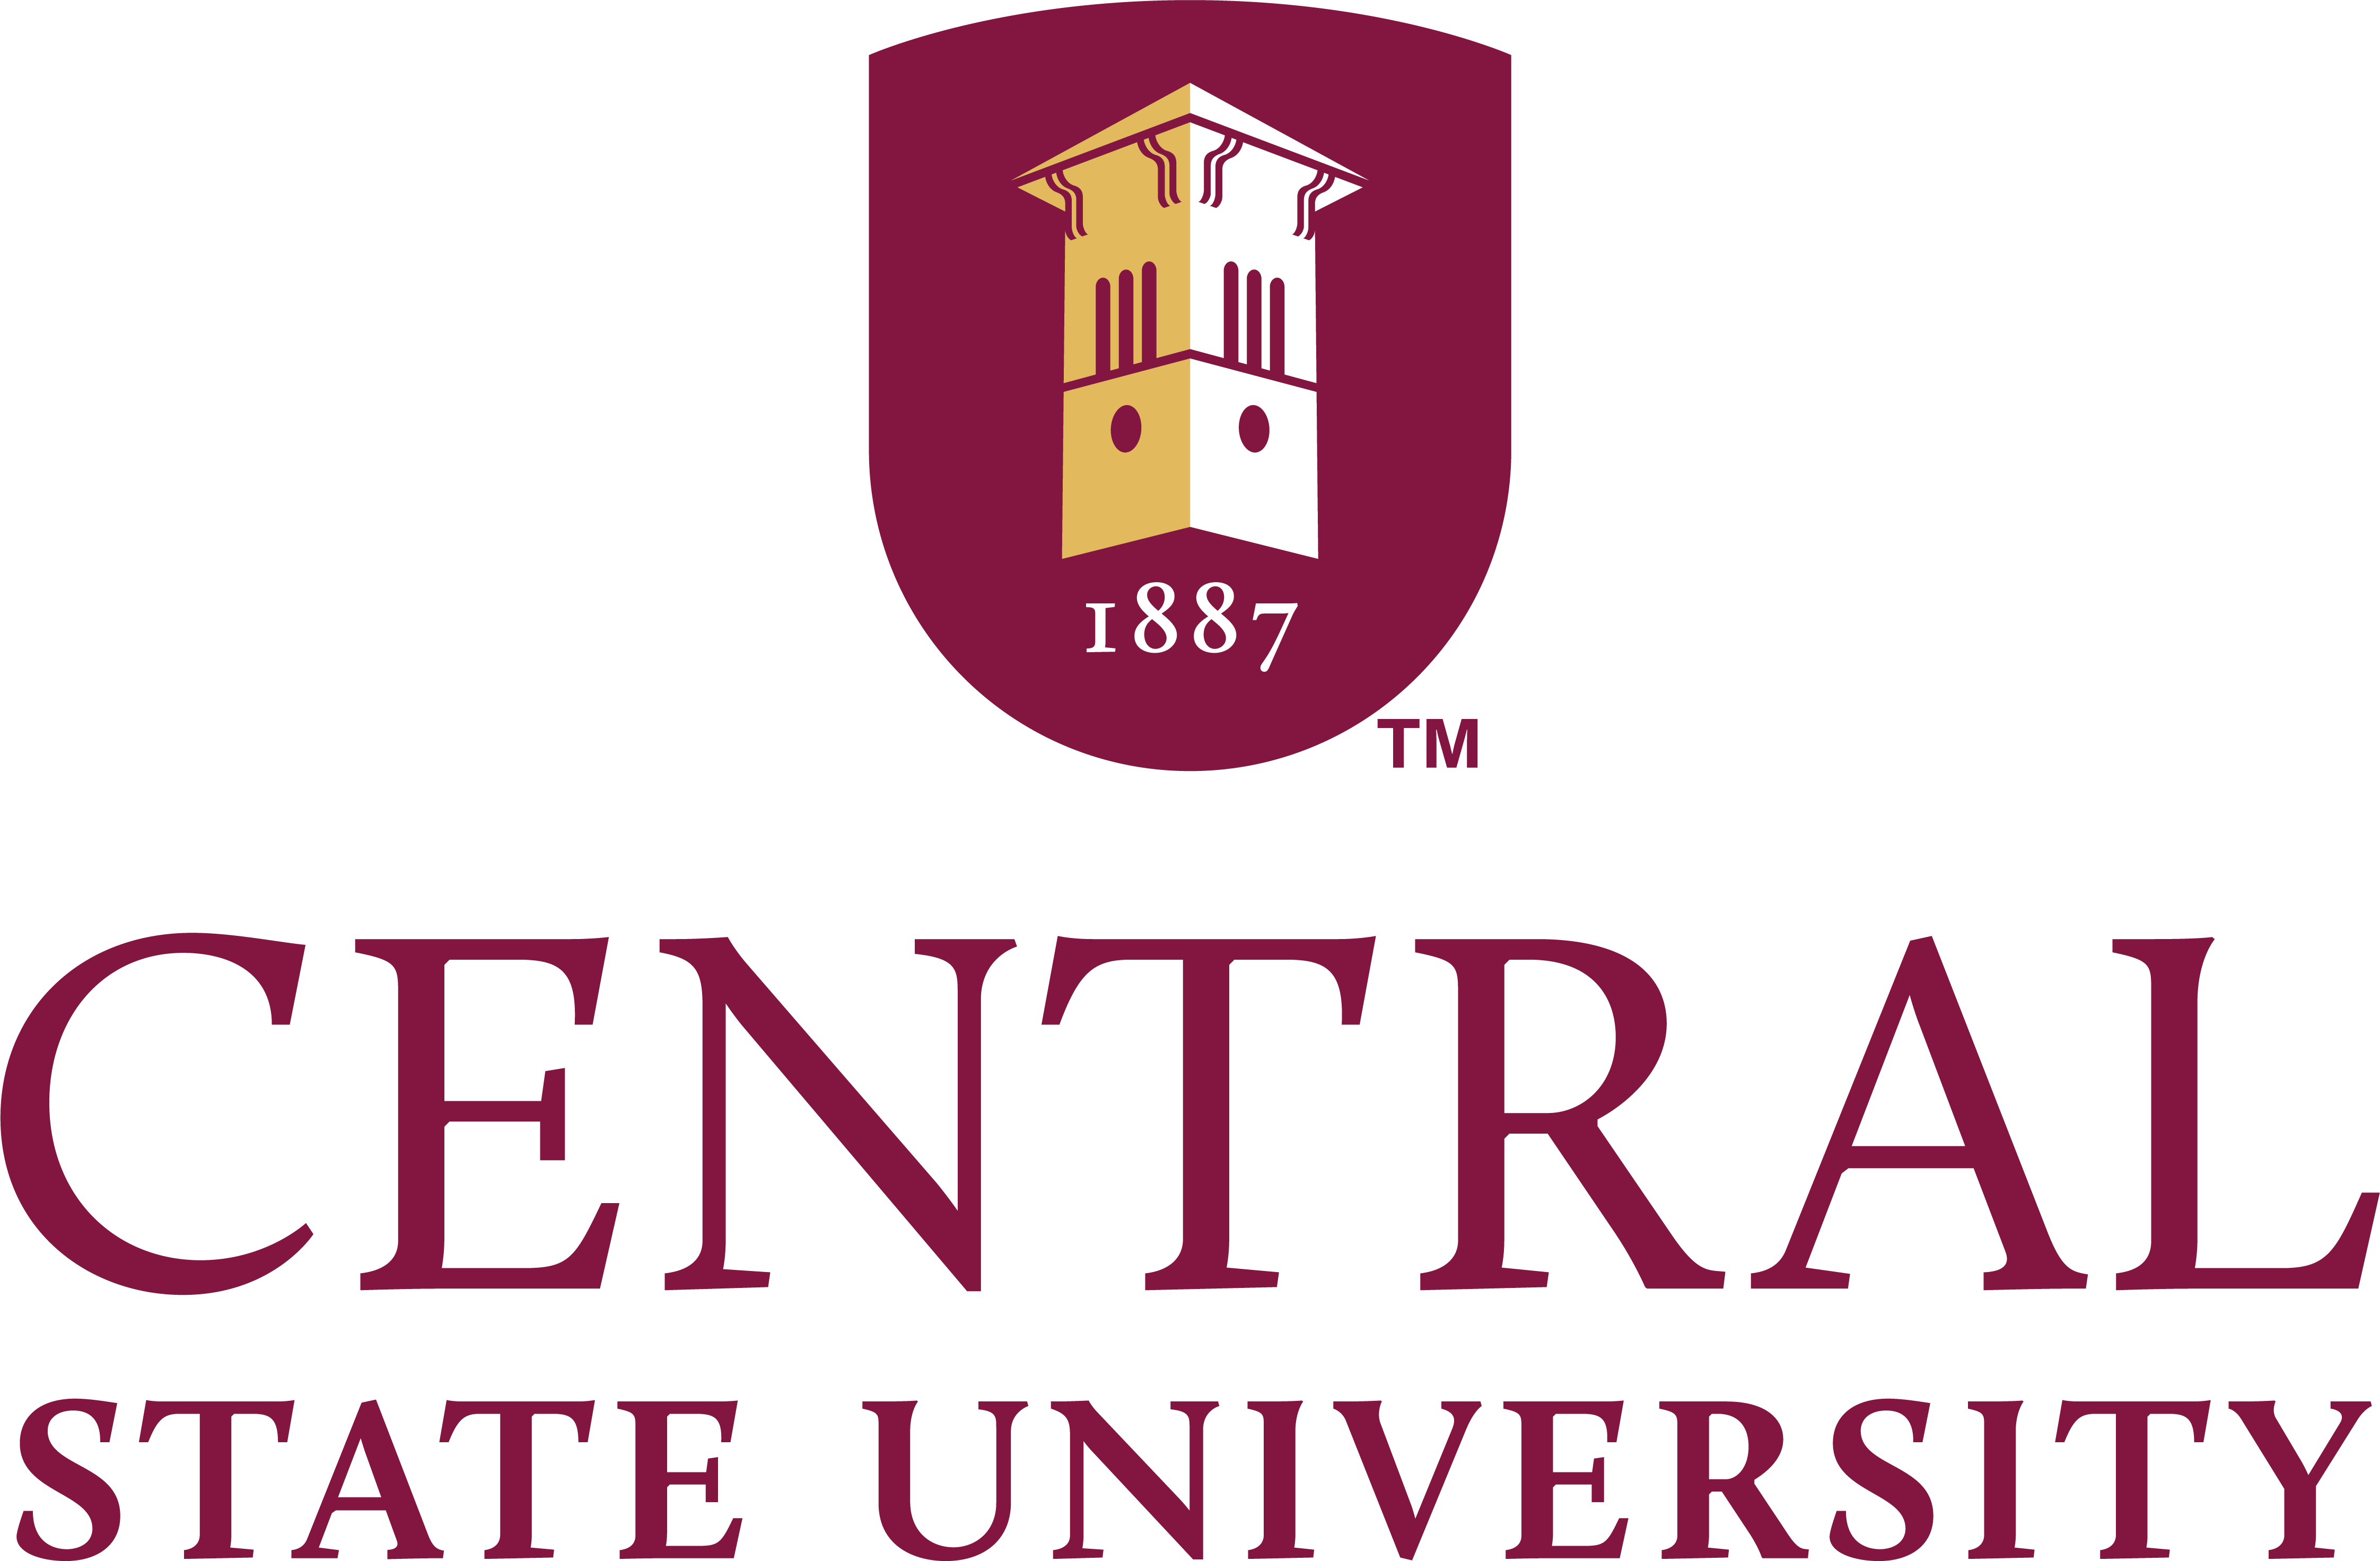 Central State University